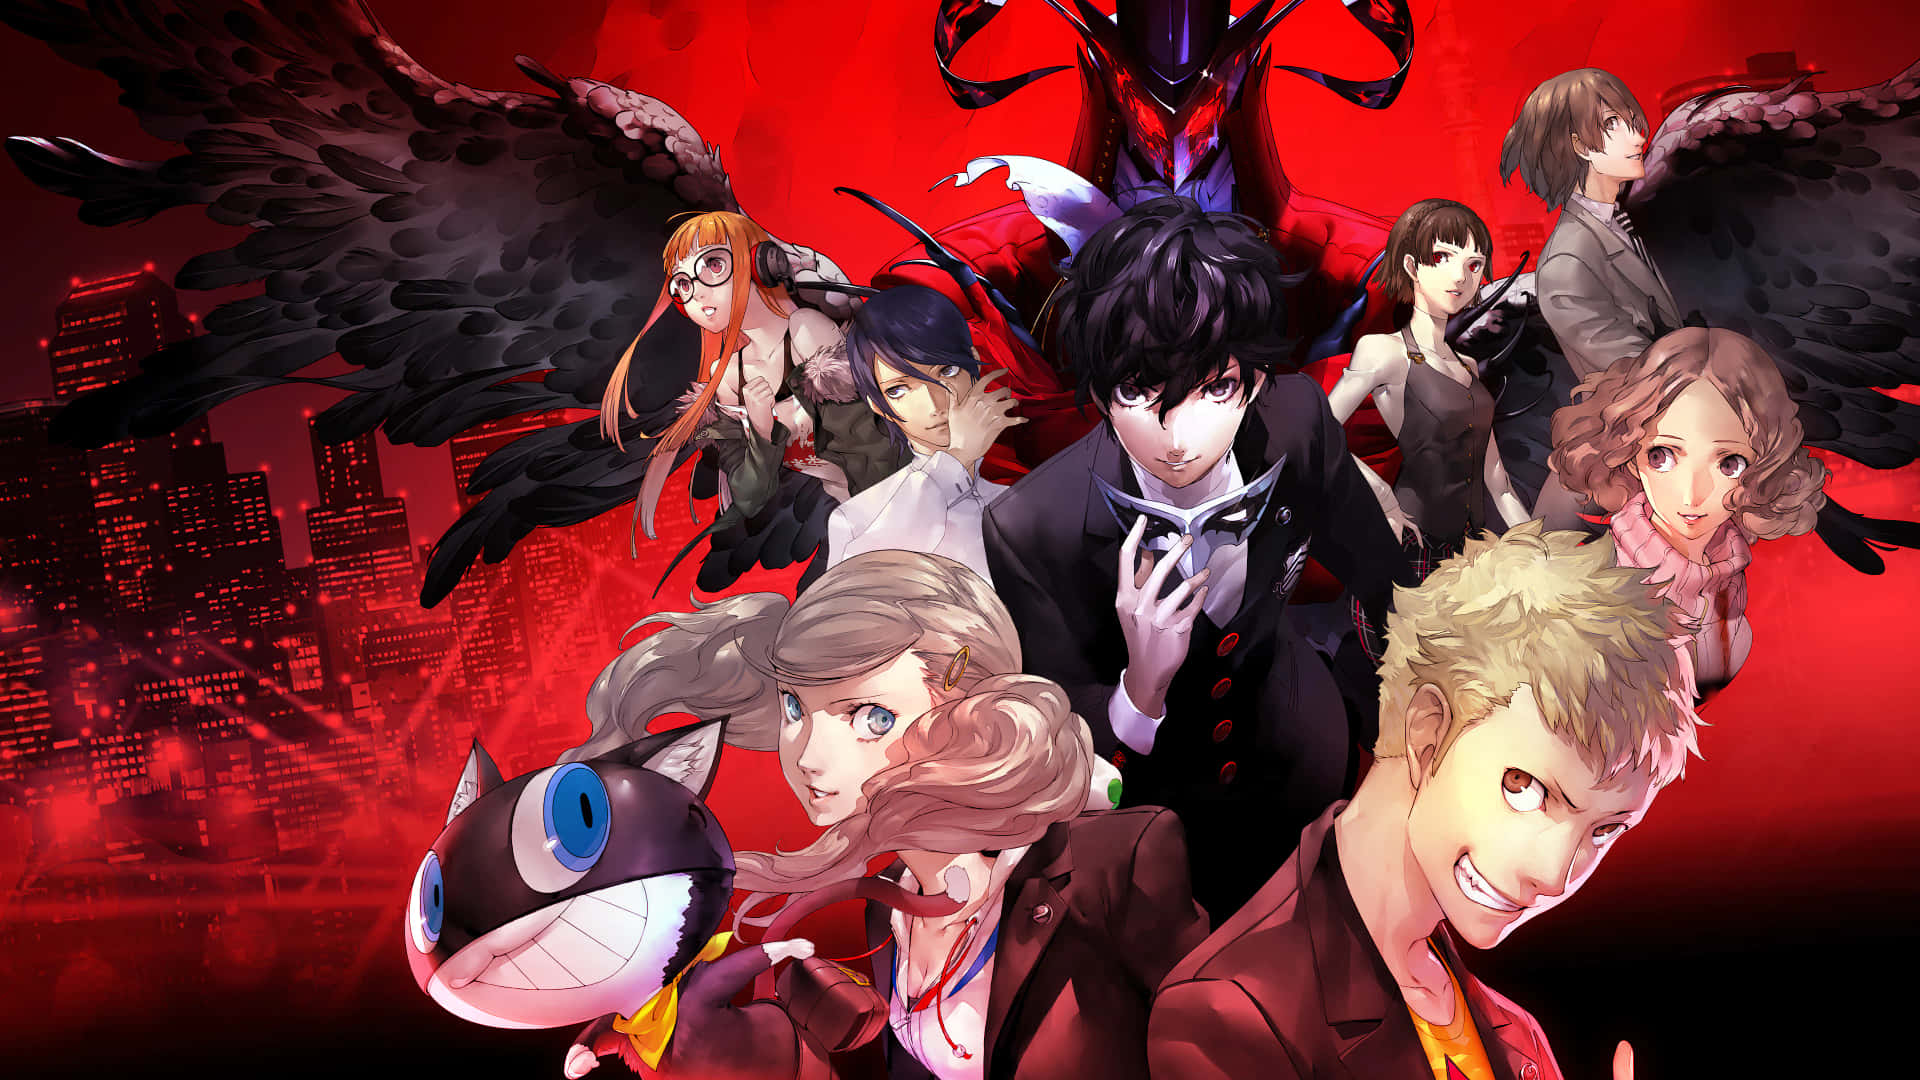 The Phantom Thieves of Persona 5 are ready to take on the corrupt system they’ve been fighting against.